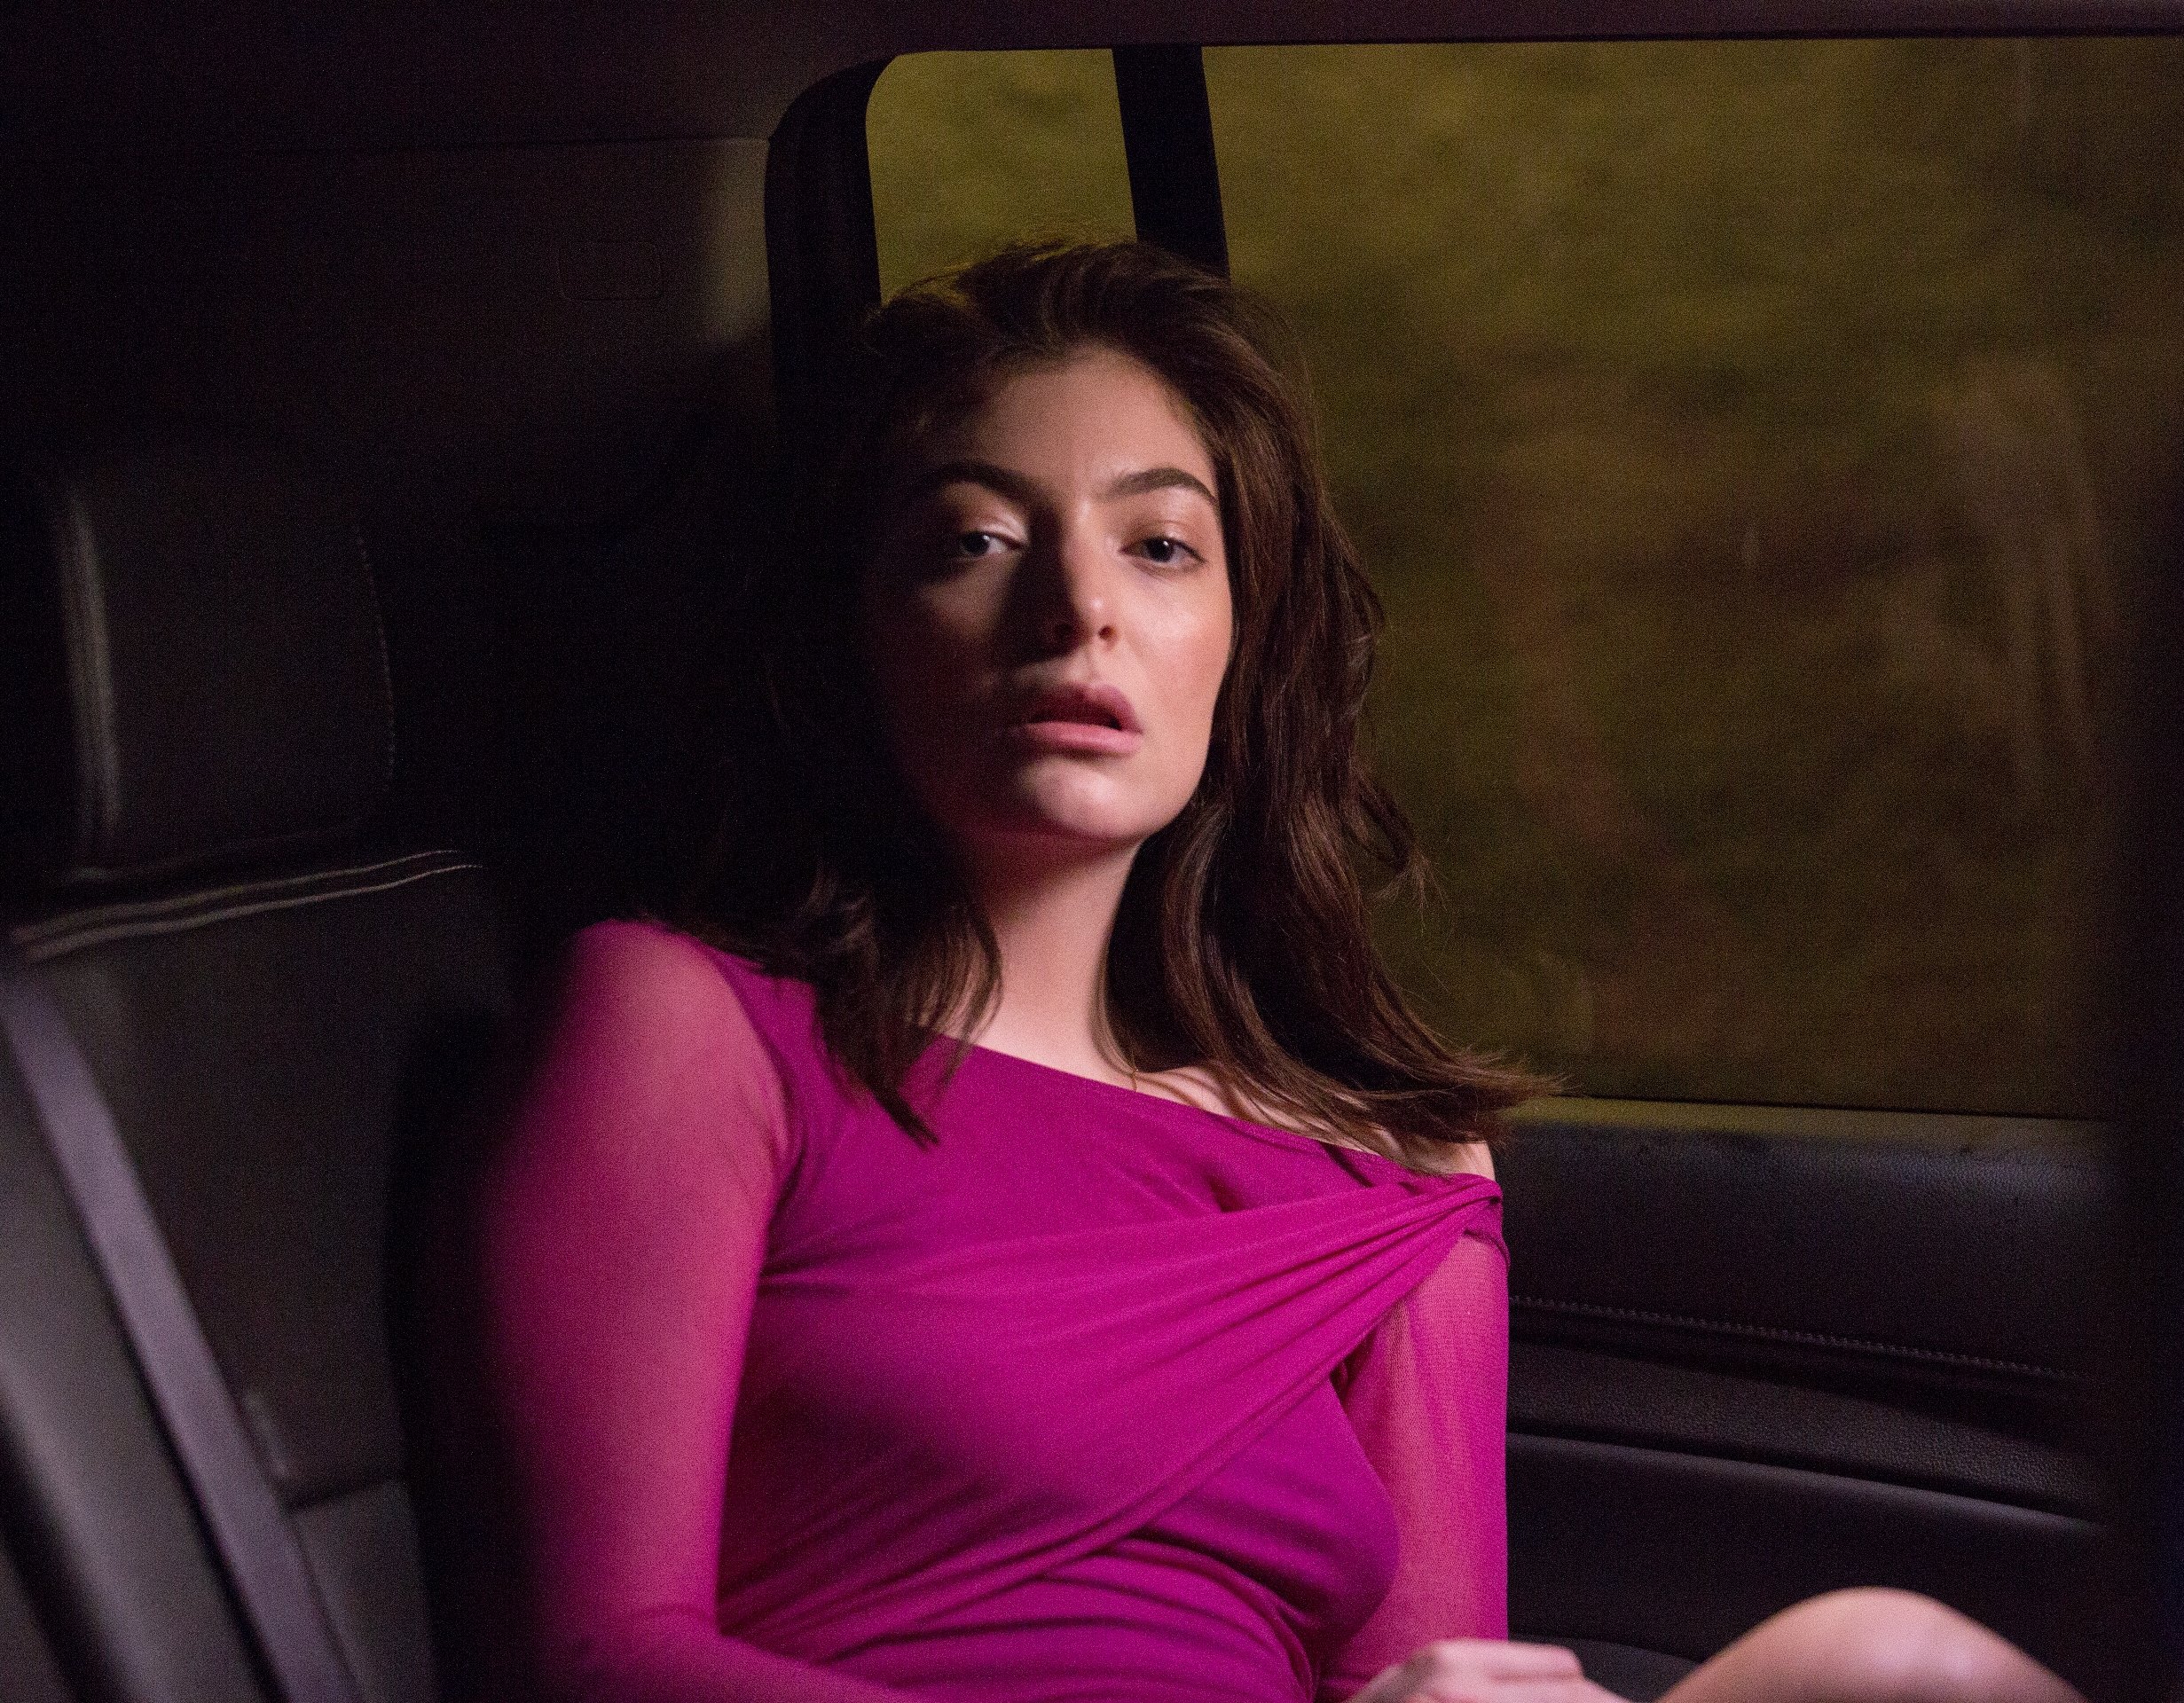 Art for Lorde's album 'Melodrama'